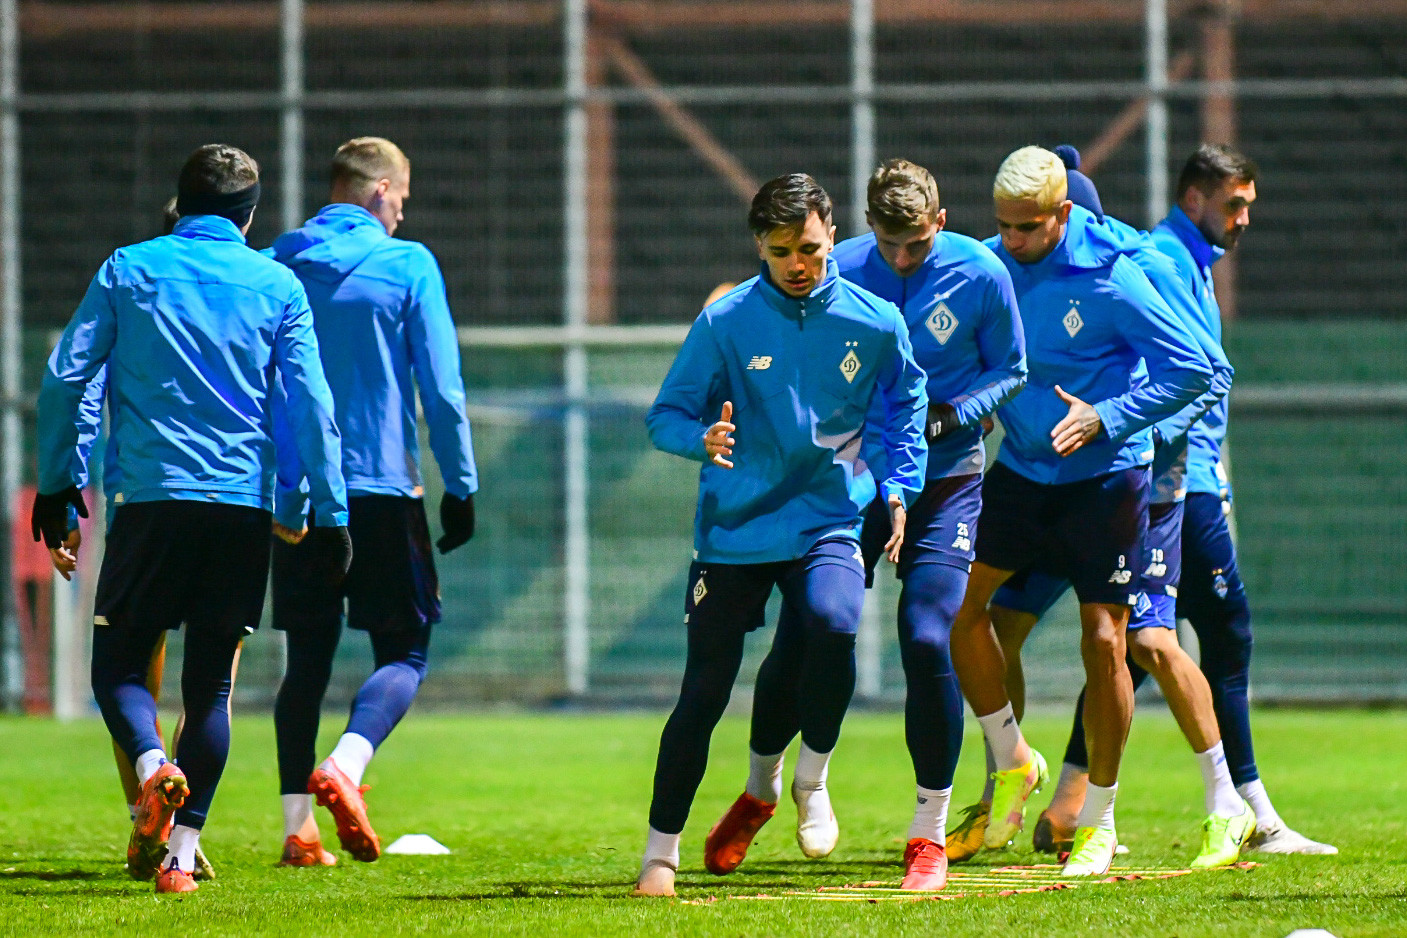 A day before the game against Barcelona: maximum concentration